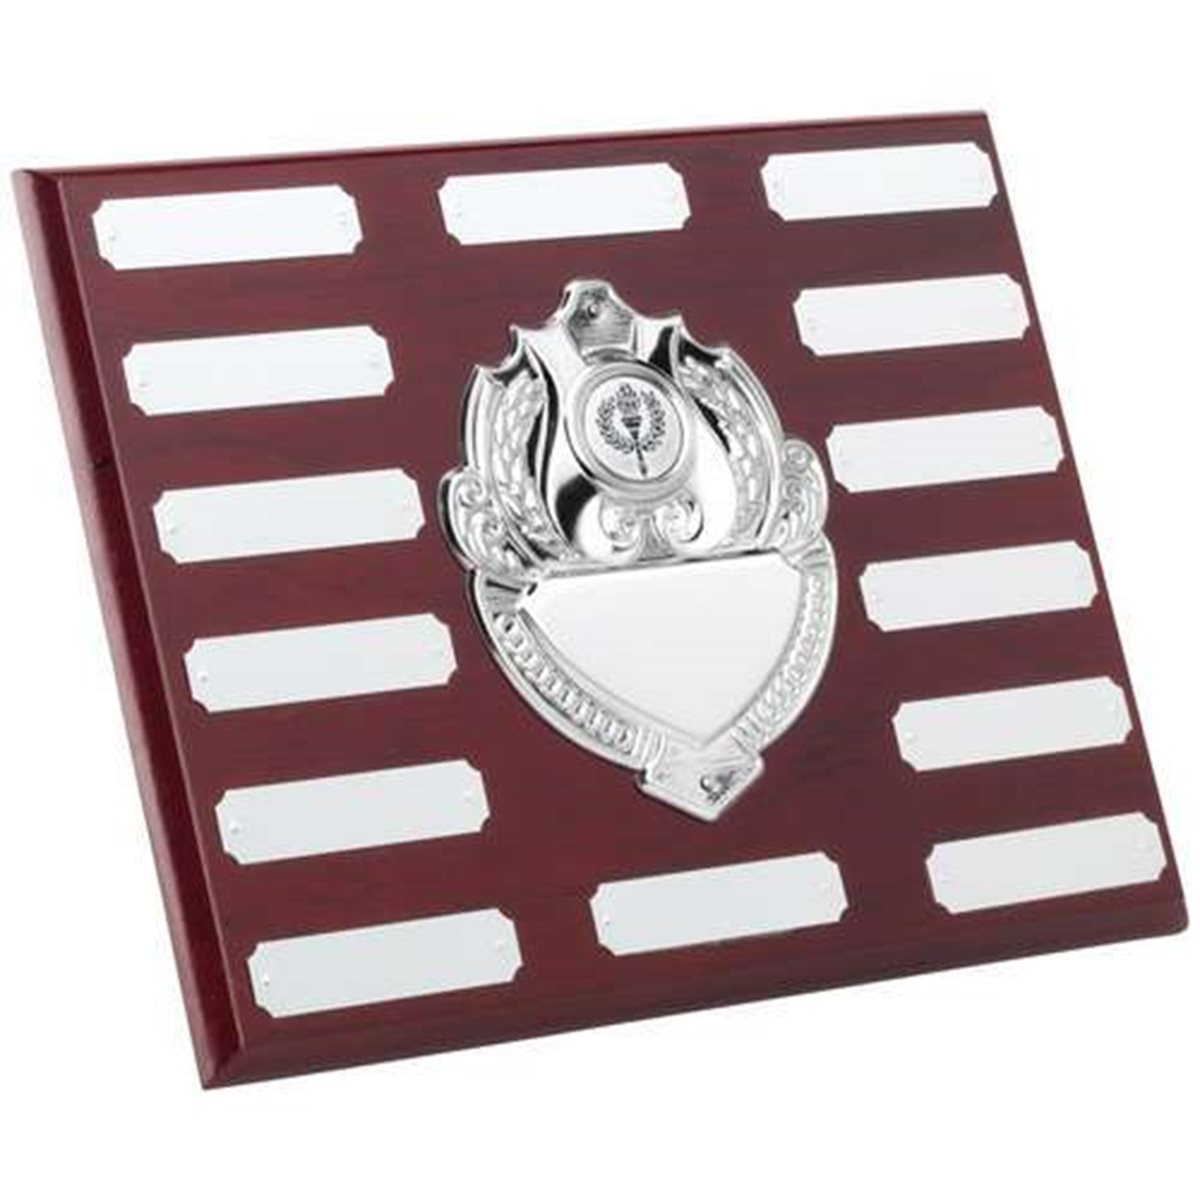 Rectangular Wooden Plaque With Chrome Fronts JR39-TRS95C